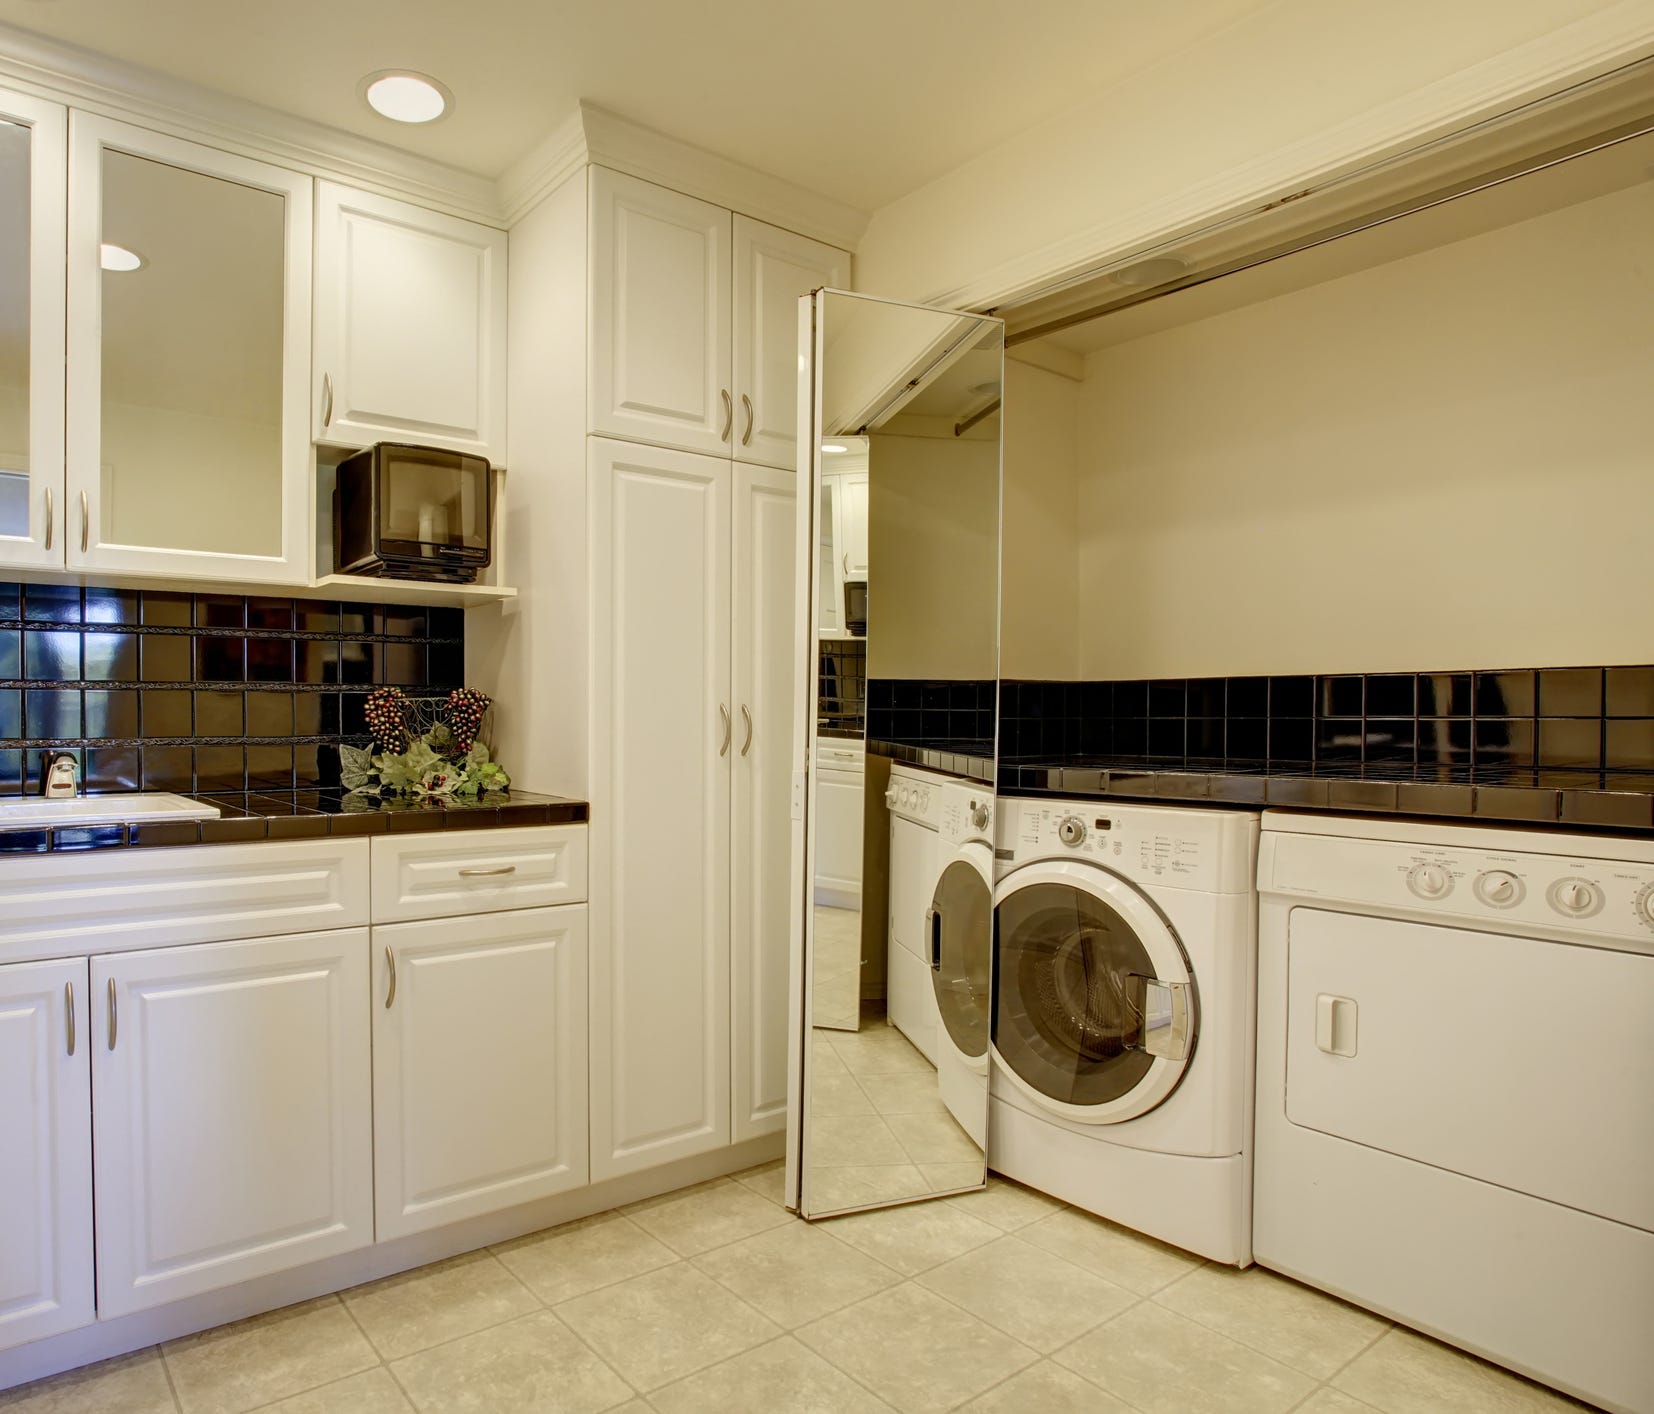 RentHop looked at common apartment amenities in the 10 largest metro areas in the U.S. to identify what drives up rent prices the most. Laundry rooms were in the top five for reasons.